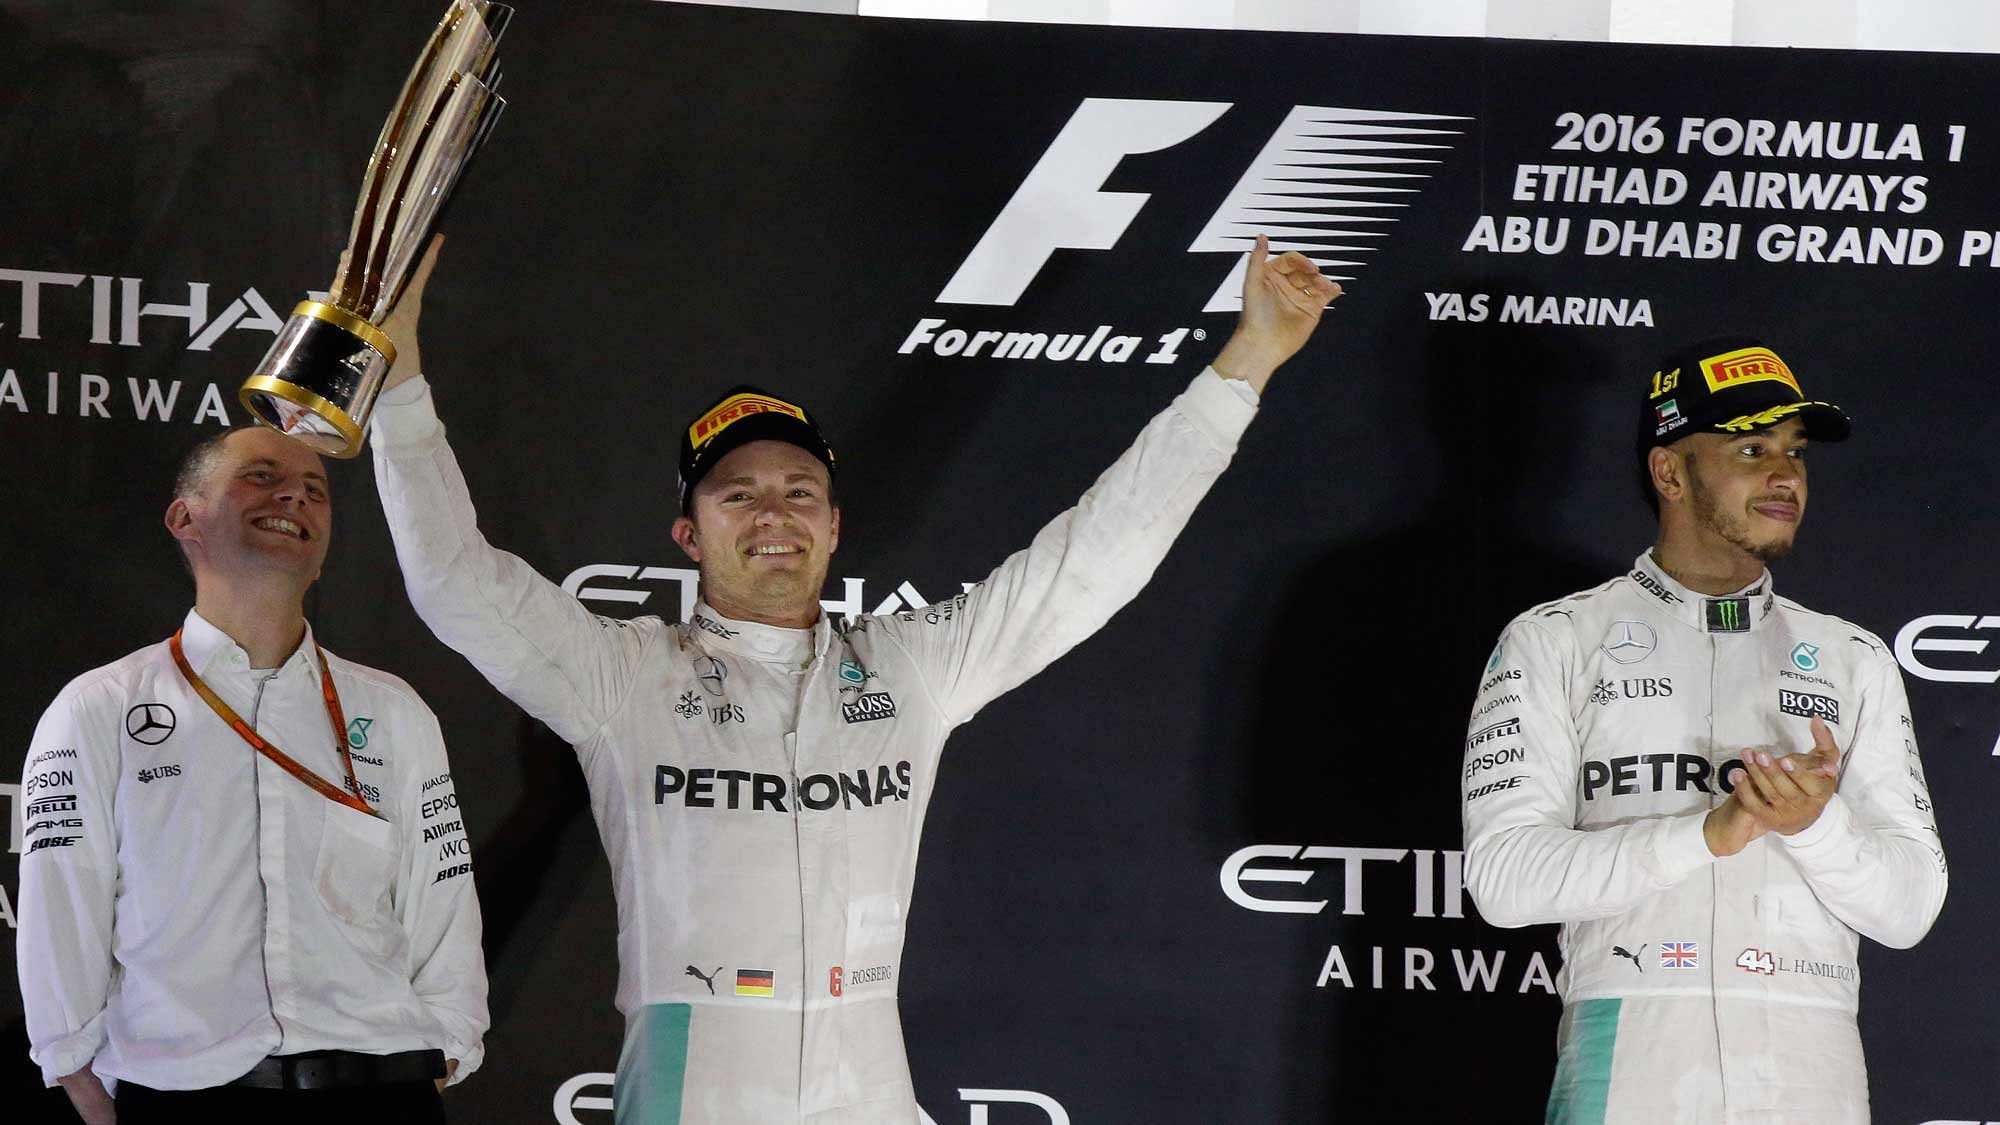 Mercedes driver Nico Rosberg celebrates on the podium after winning the 2016 world championship while teammate Mercedes driver Lewis Hamilton, right, applauds. (Photo: AP)